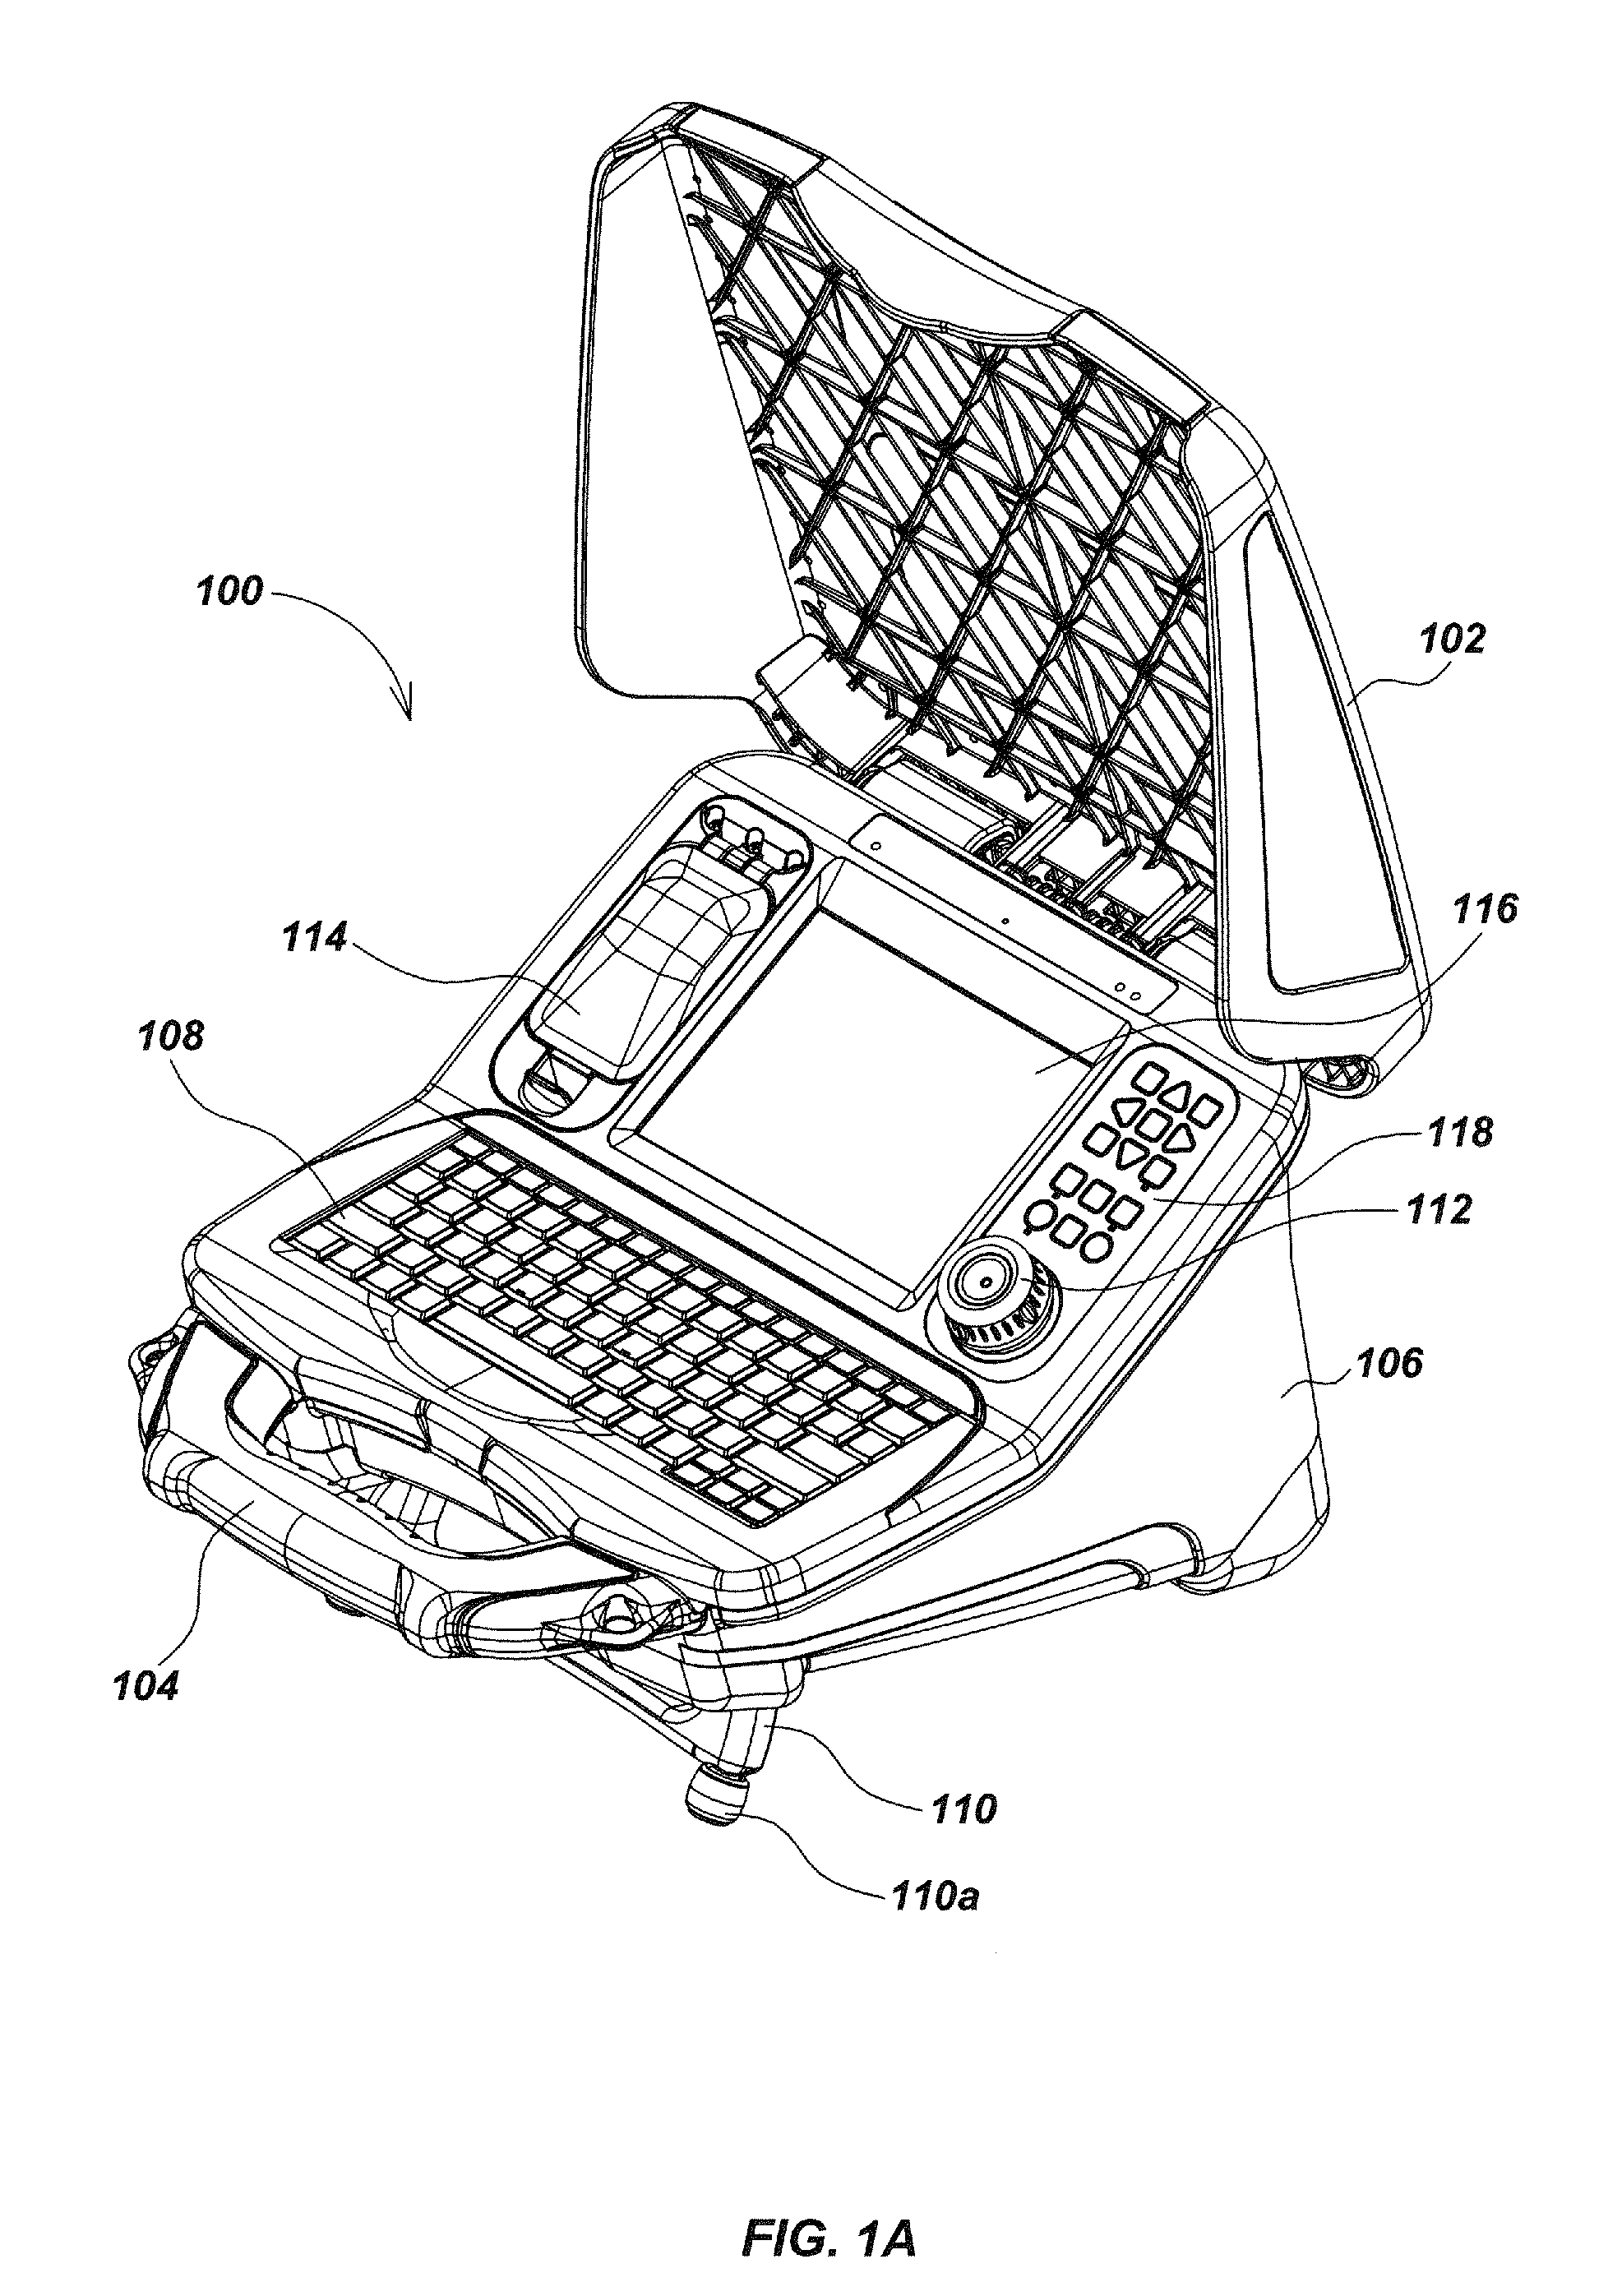 Self-grounding transmitting portable camera controller for use with pipe inspection system